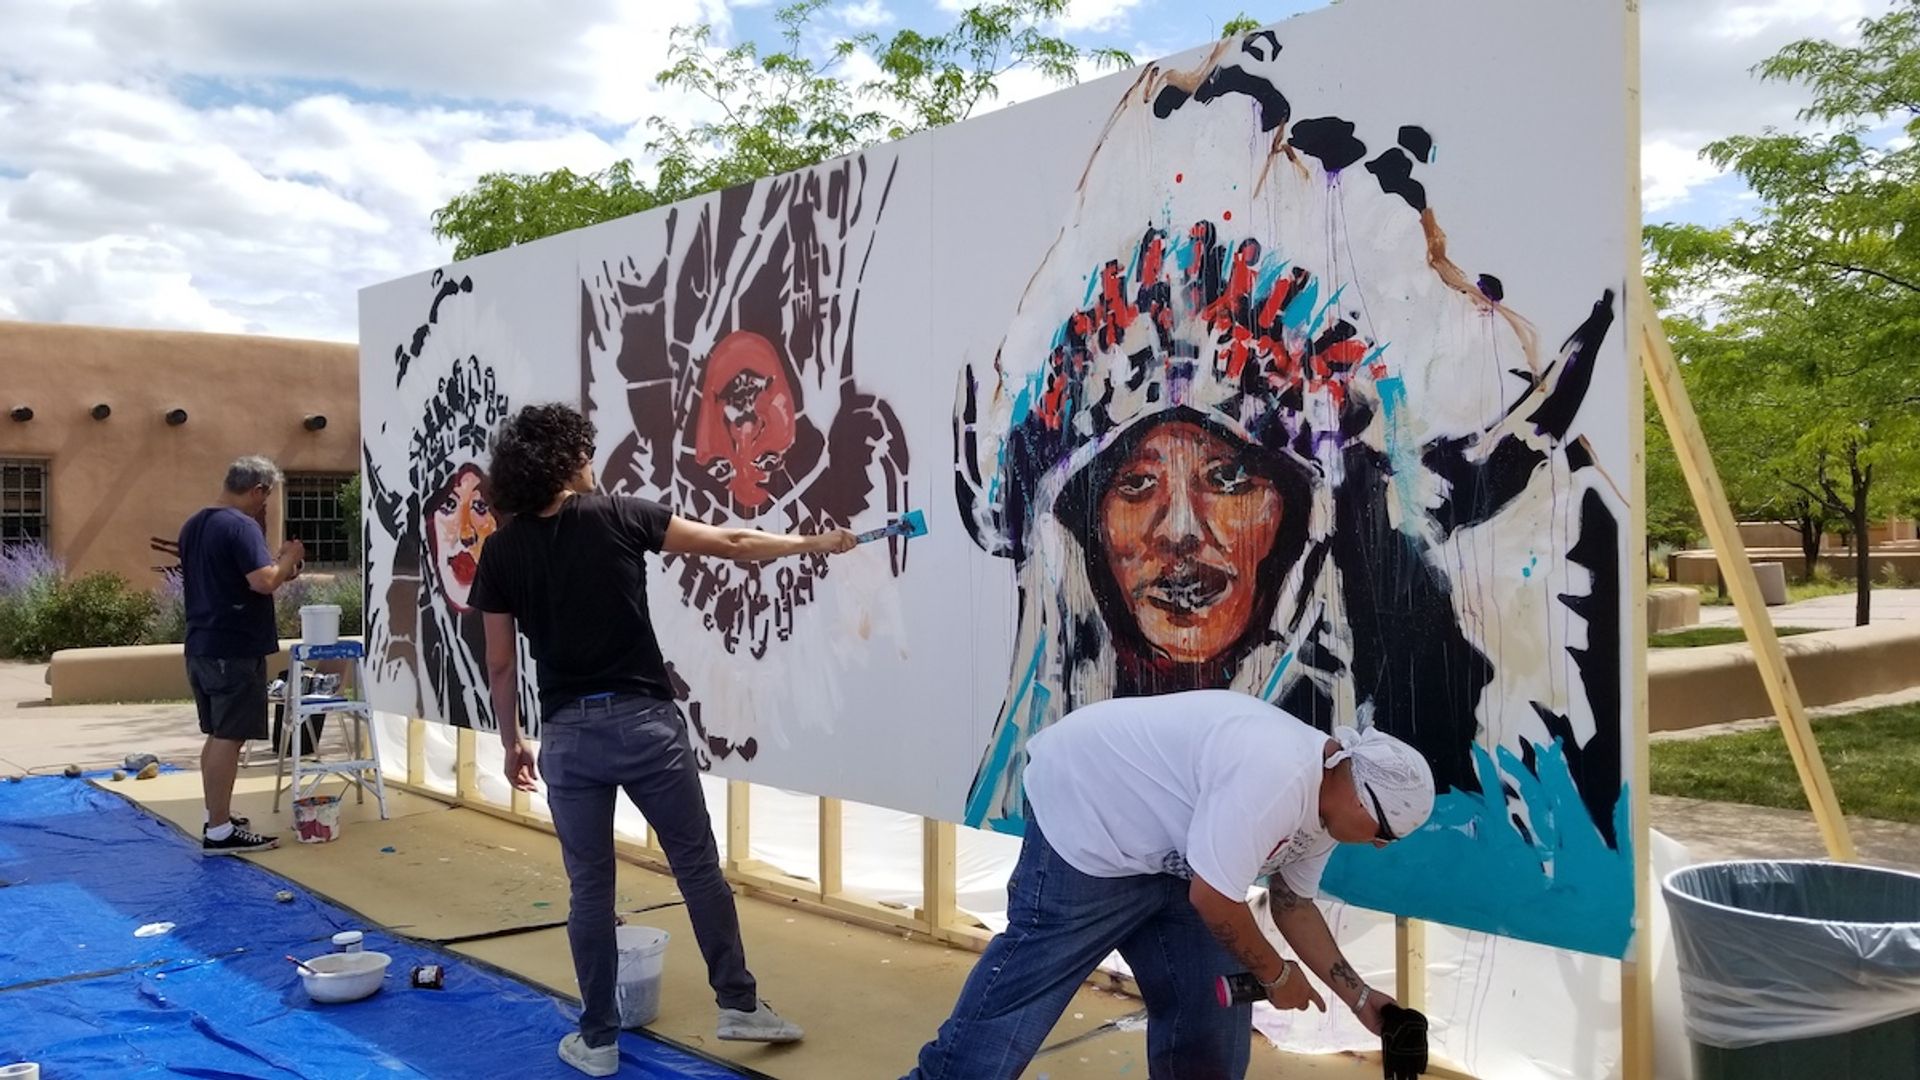 The Romero brothers' mural in progress Courtesy of the artists